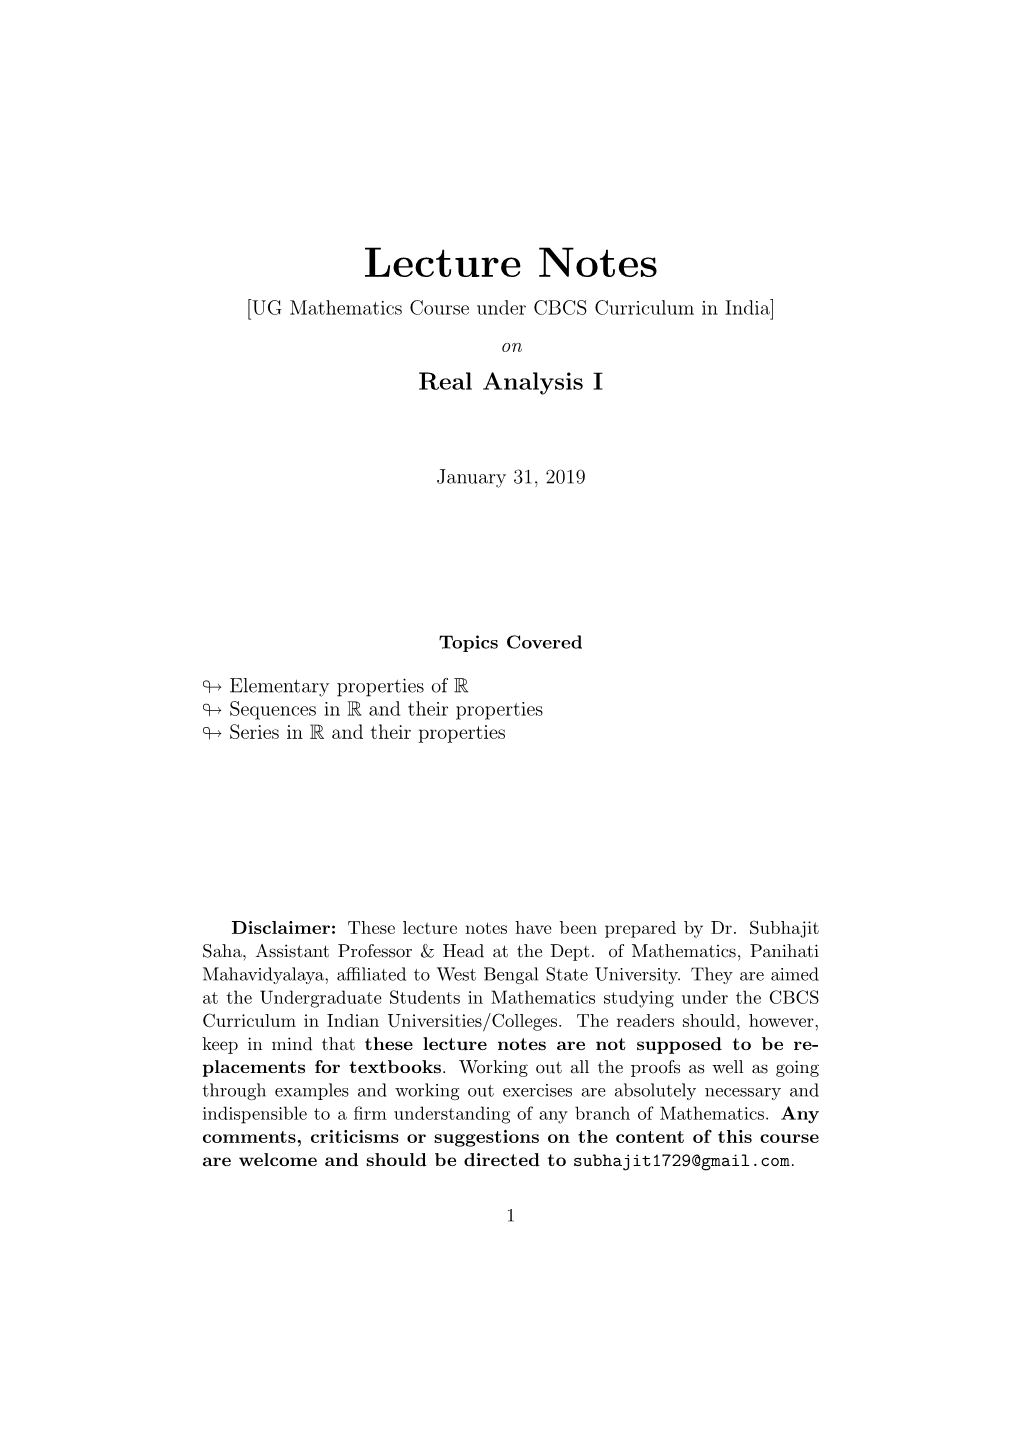 Lecture Notes [UG Mathematics Course Under CBCS Curriculum in India] on Real Analysis I